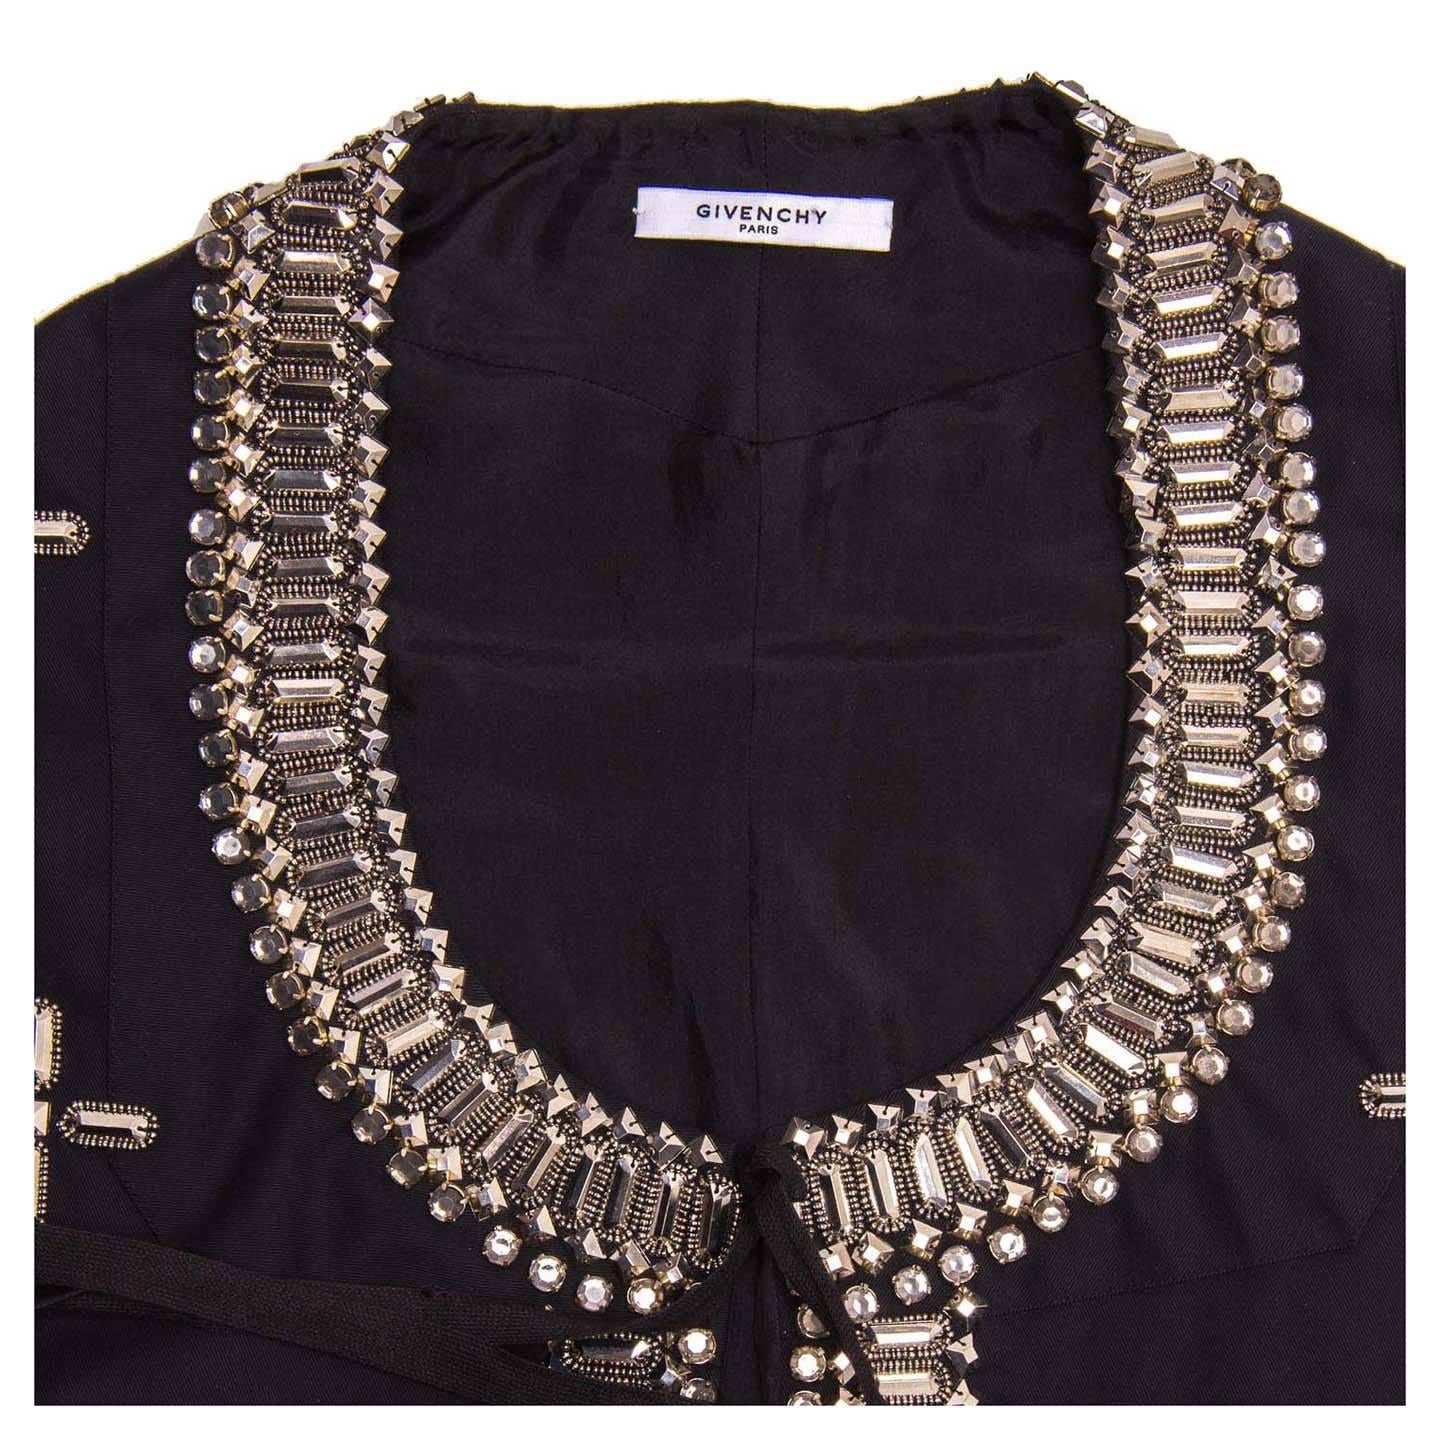 Givenchy Black Cotton & Rhinestone Vest In New Condition For Sale In Brooklyn, NY